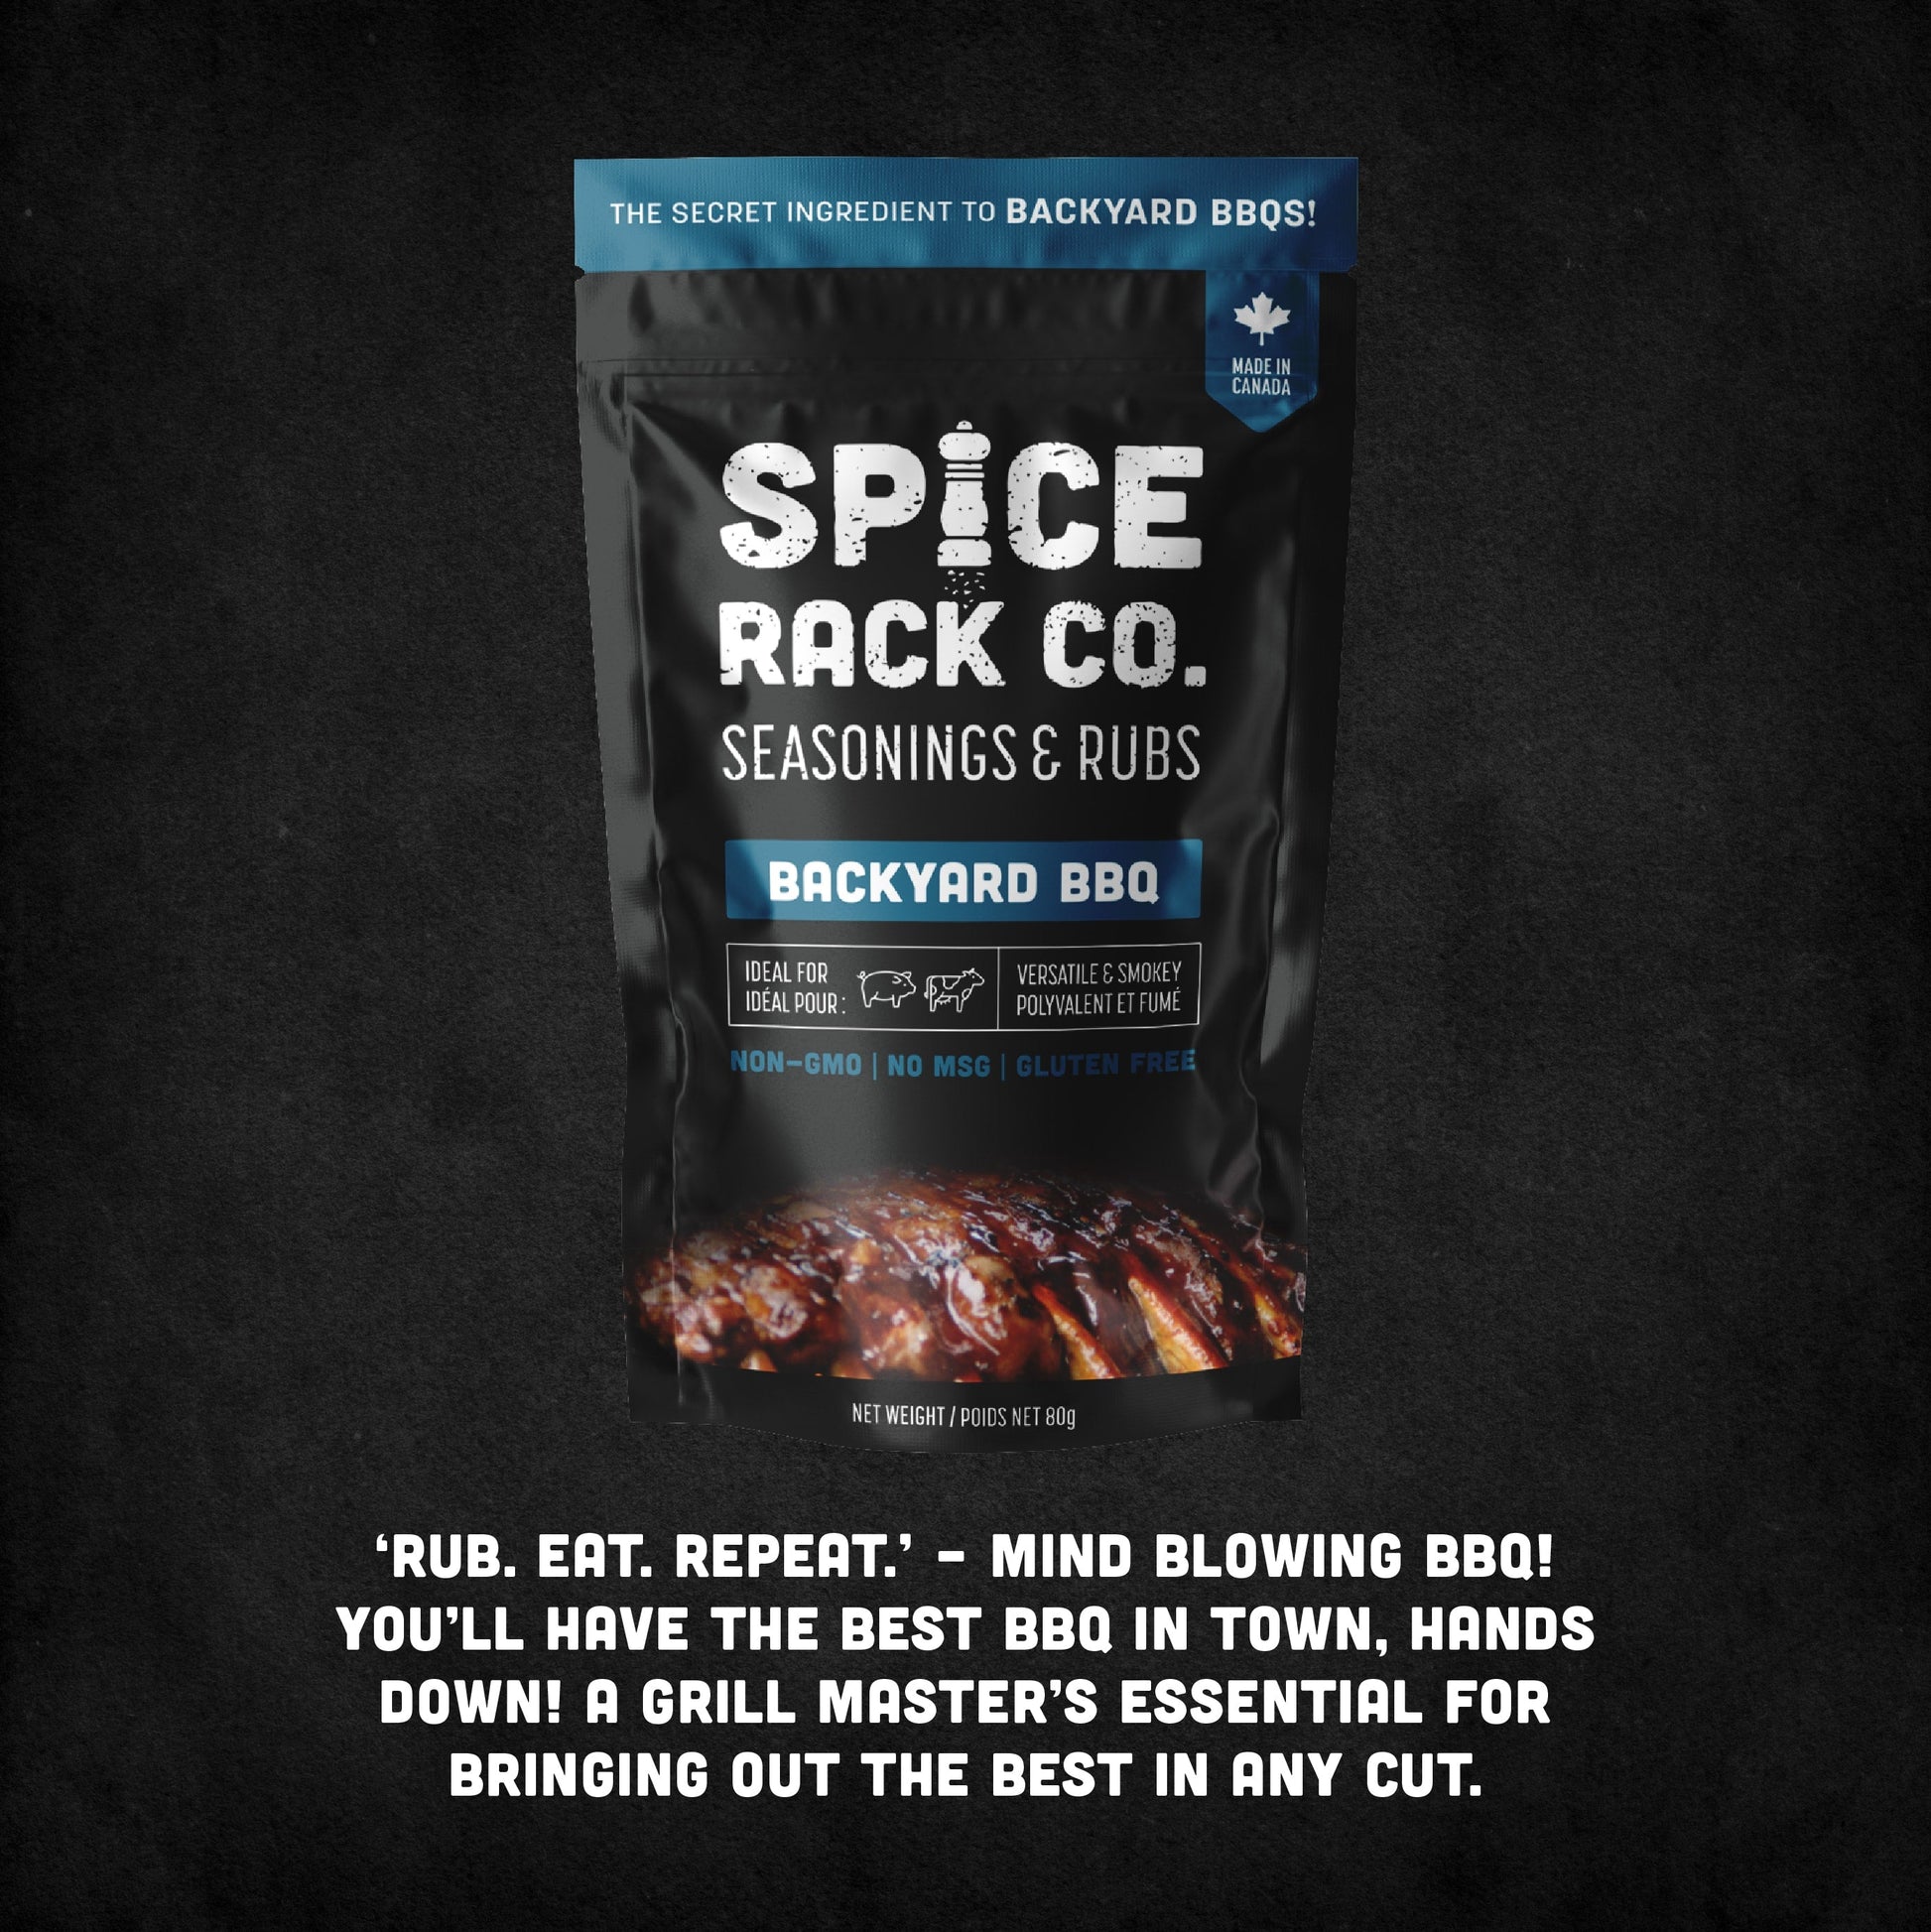 Spice Rack Co Backyard BBQ package with text: rub. eat. repeat.